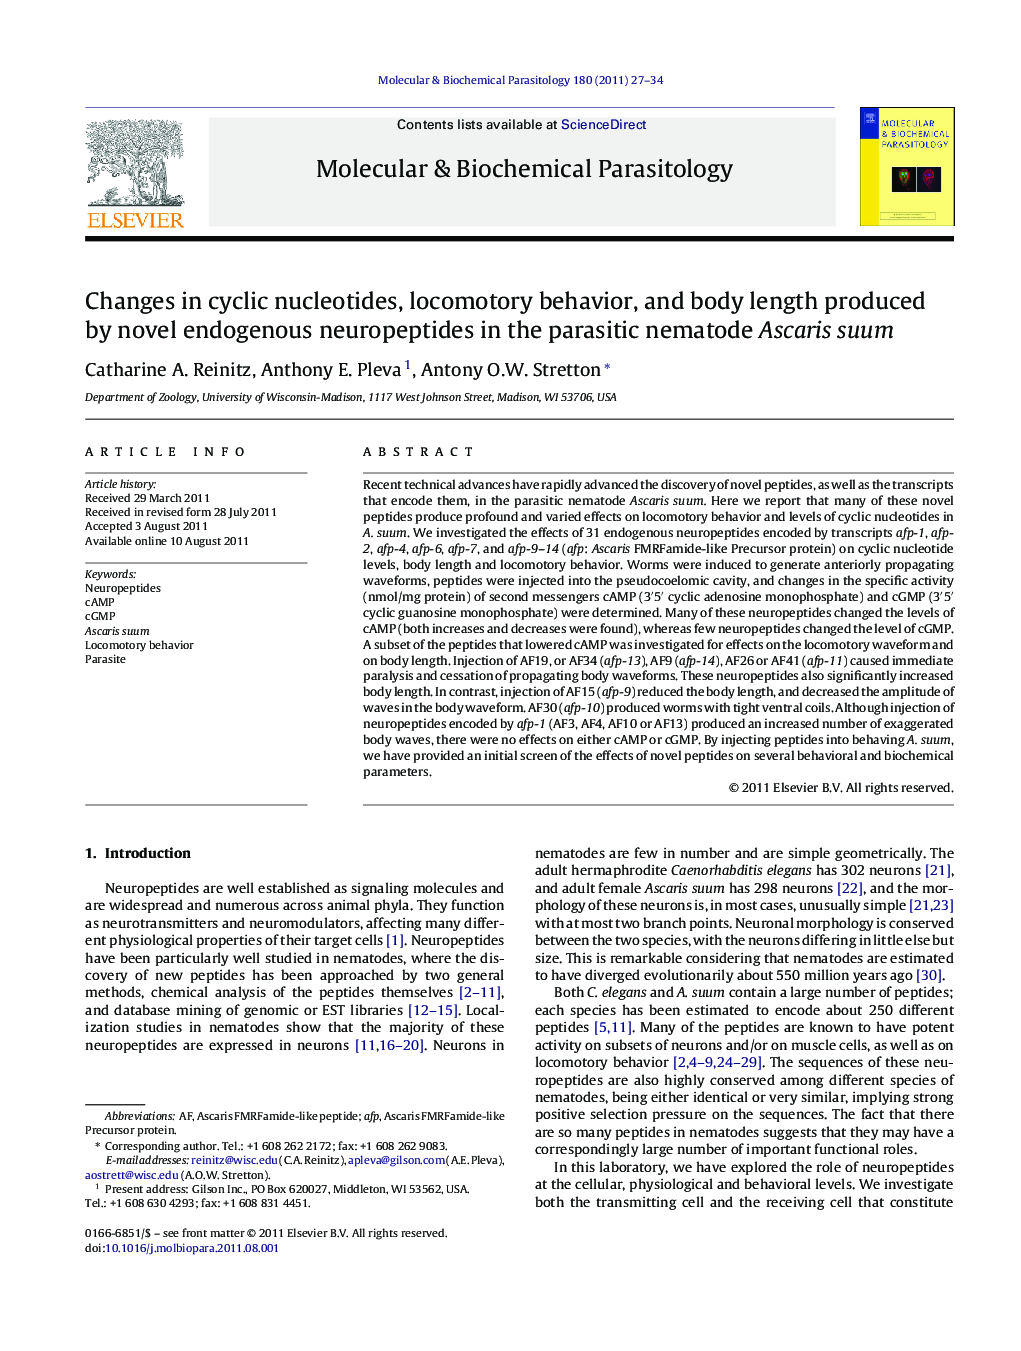 Changes in cyclic nucleotides, locomotory behavior, and body length produced by novel endogenous neuropeptides in the parasitic nematode Ascaris suum